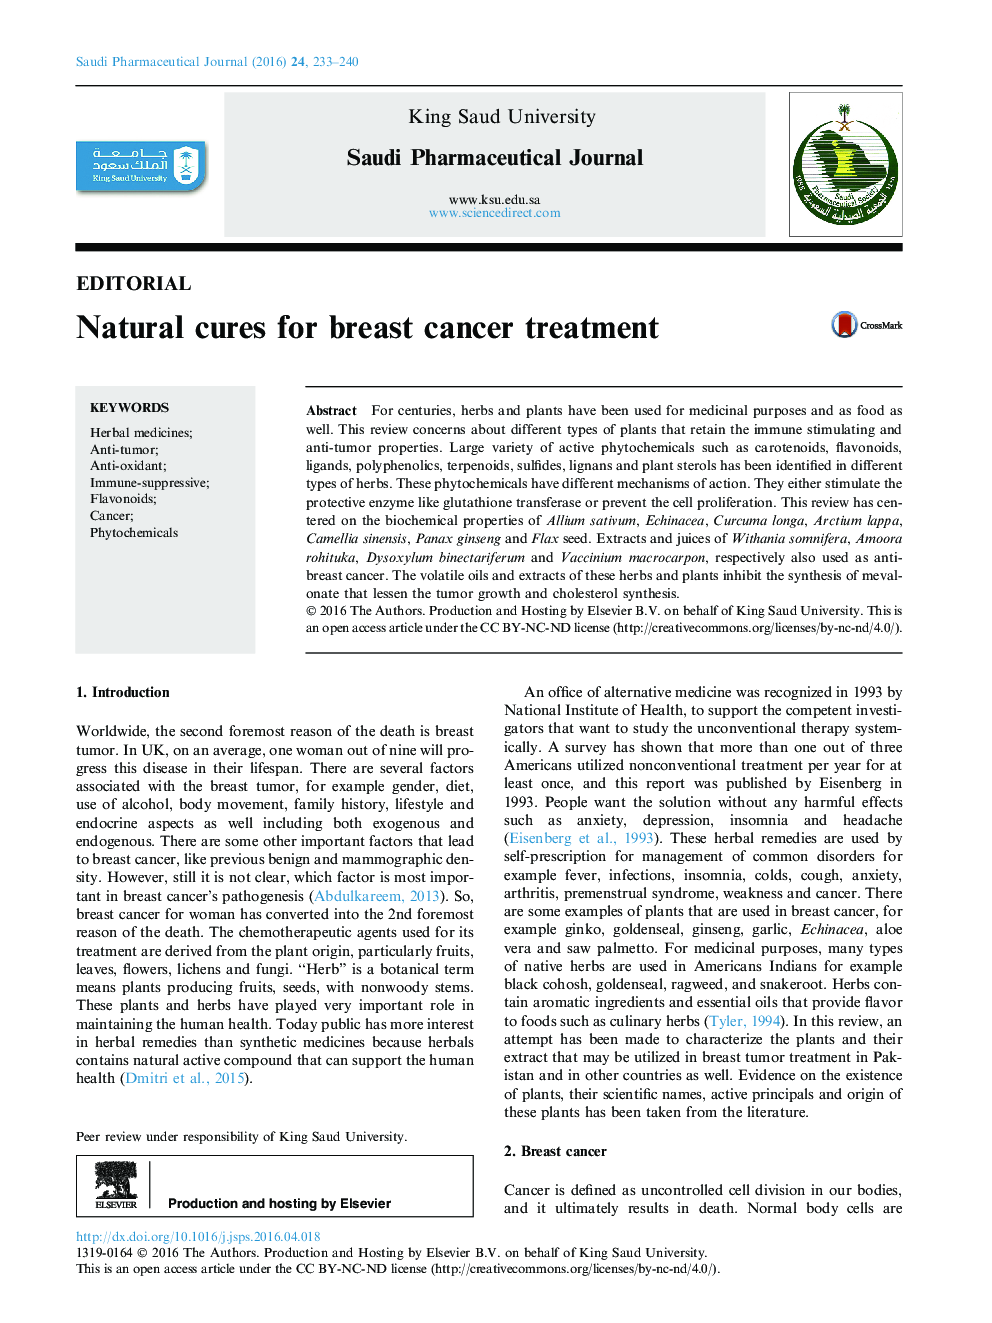 Natural cures for breast cancer treatment 